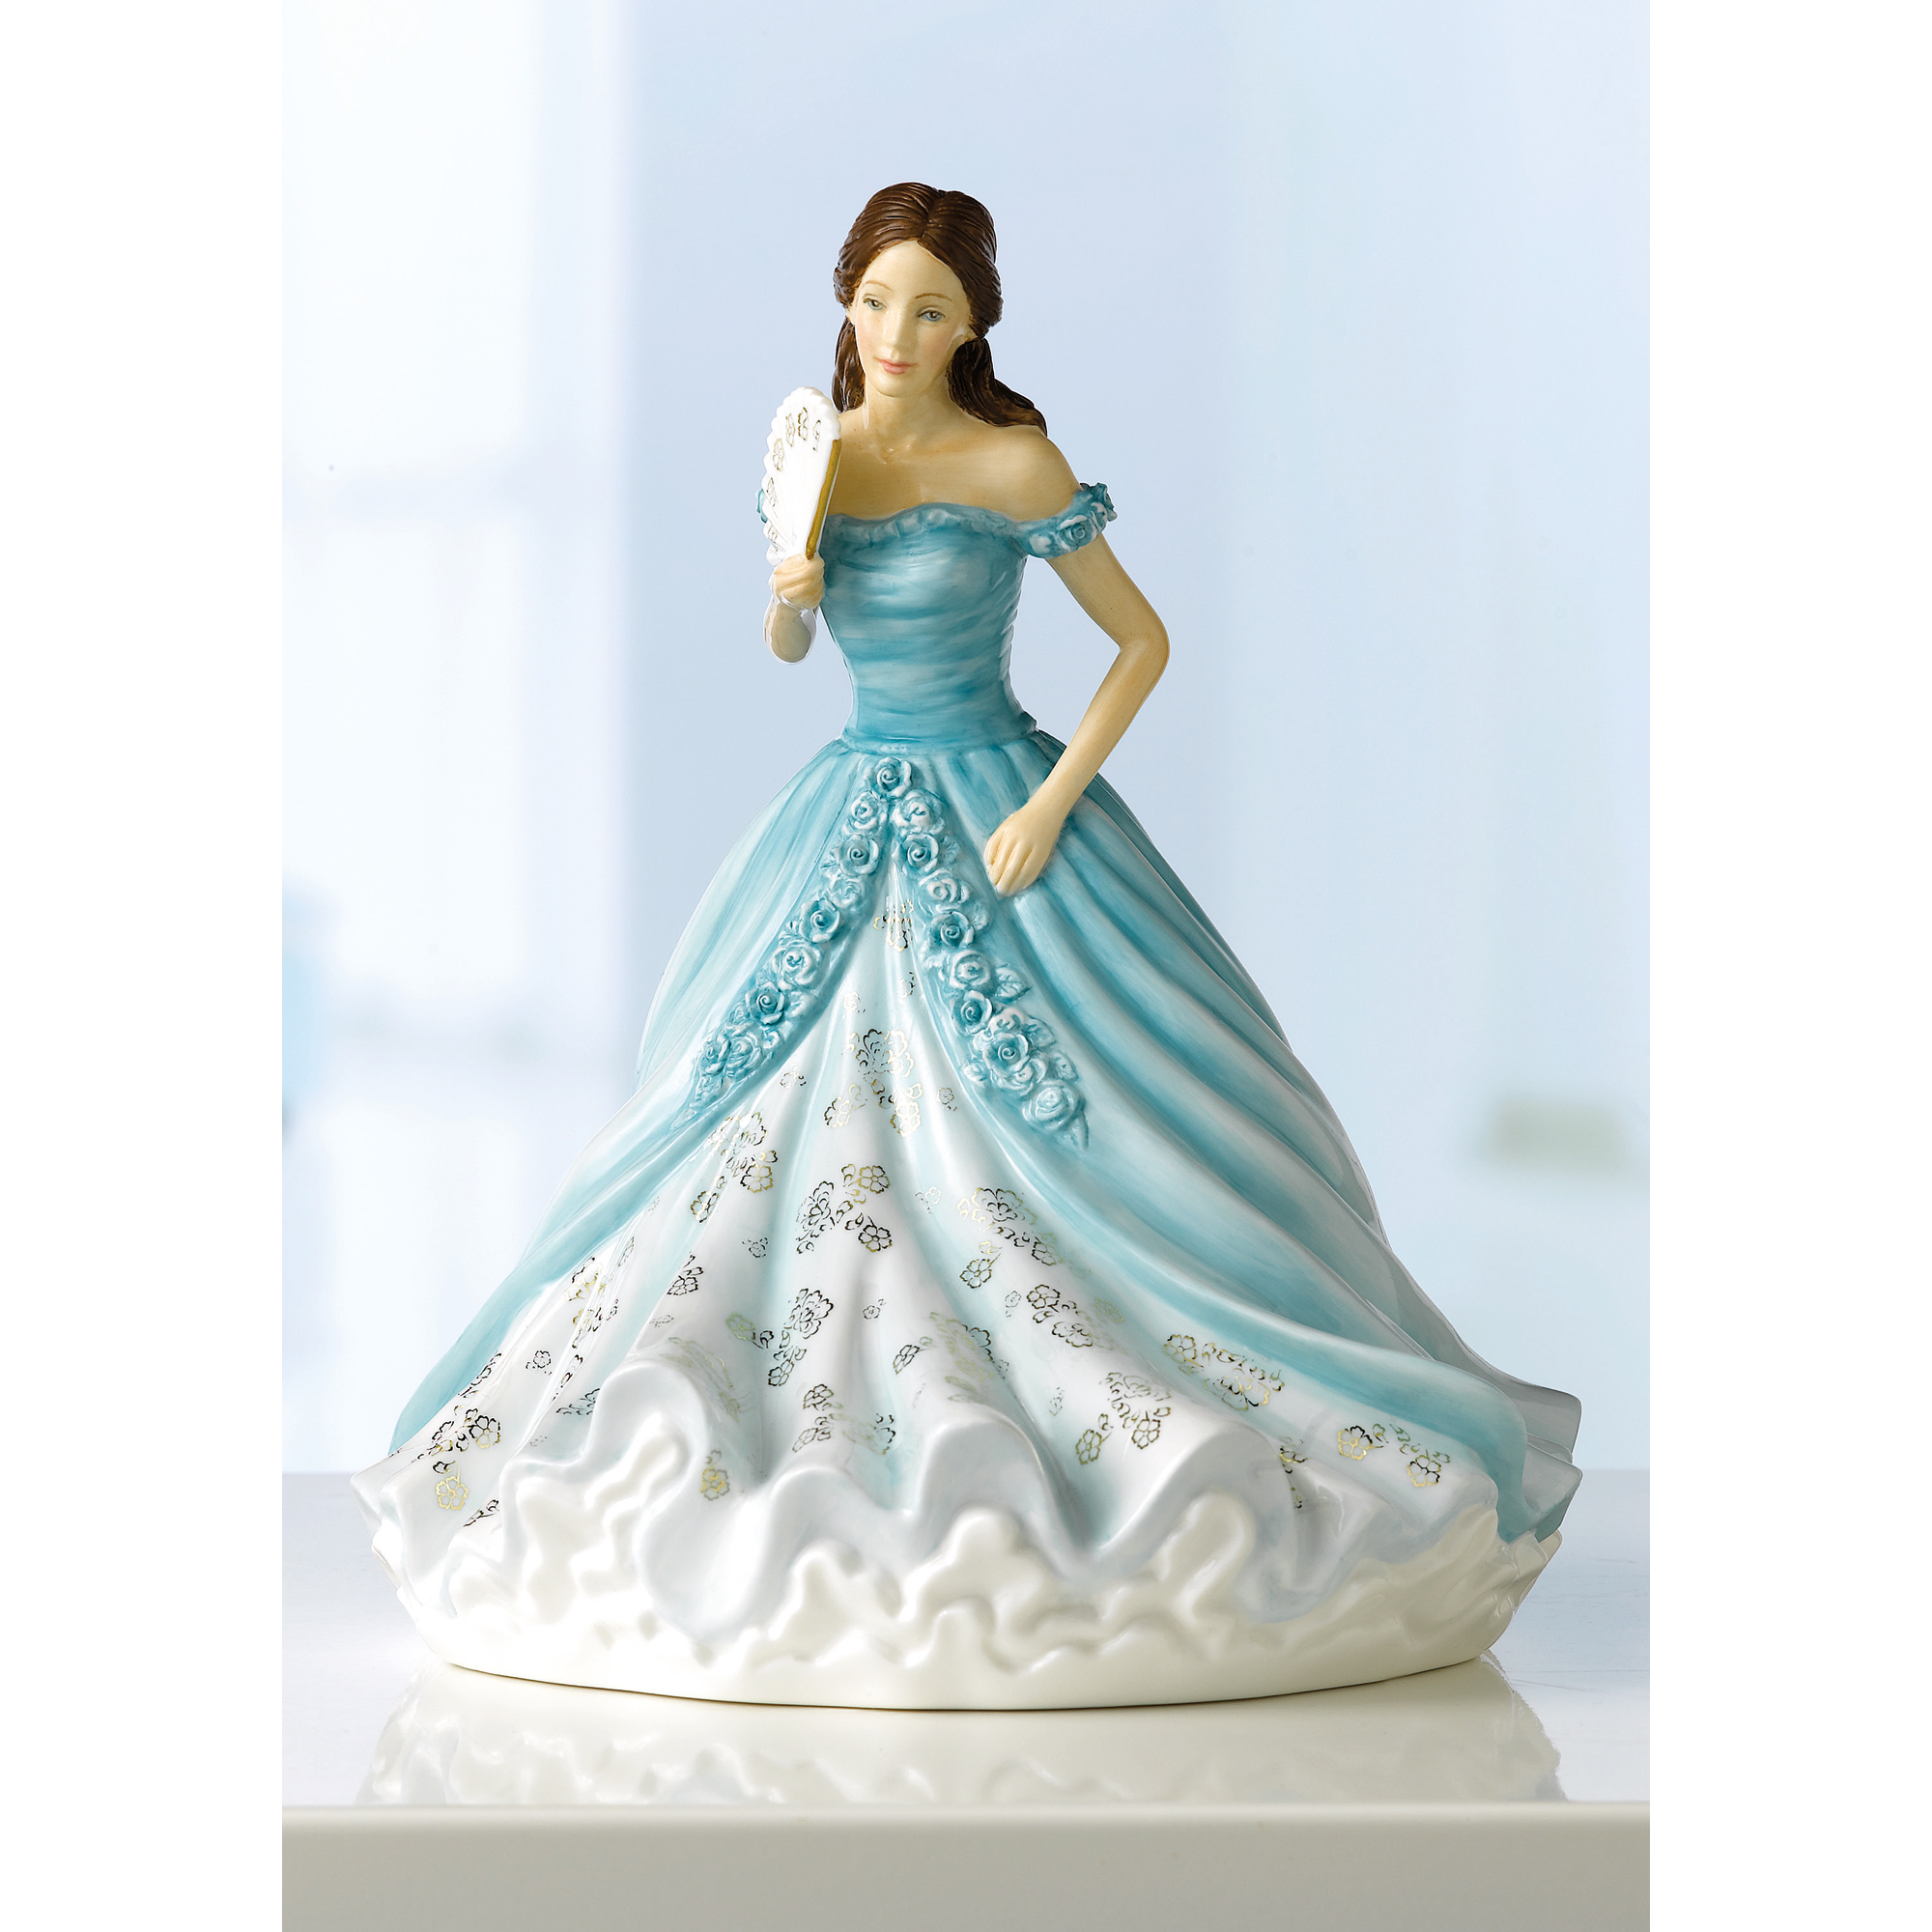 Annabelle HN5911 2019 Figure of the Year Royal Doulton Figurine